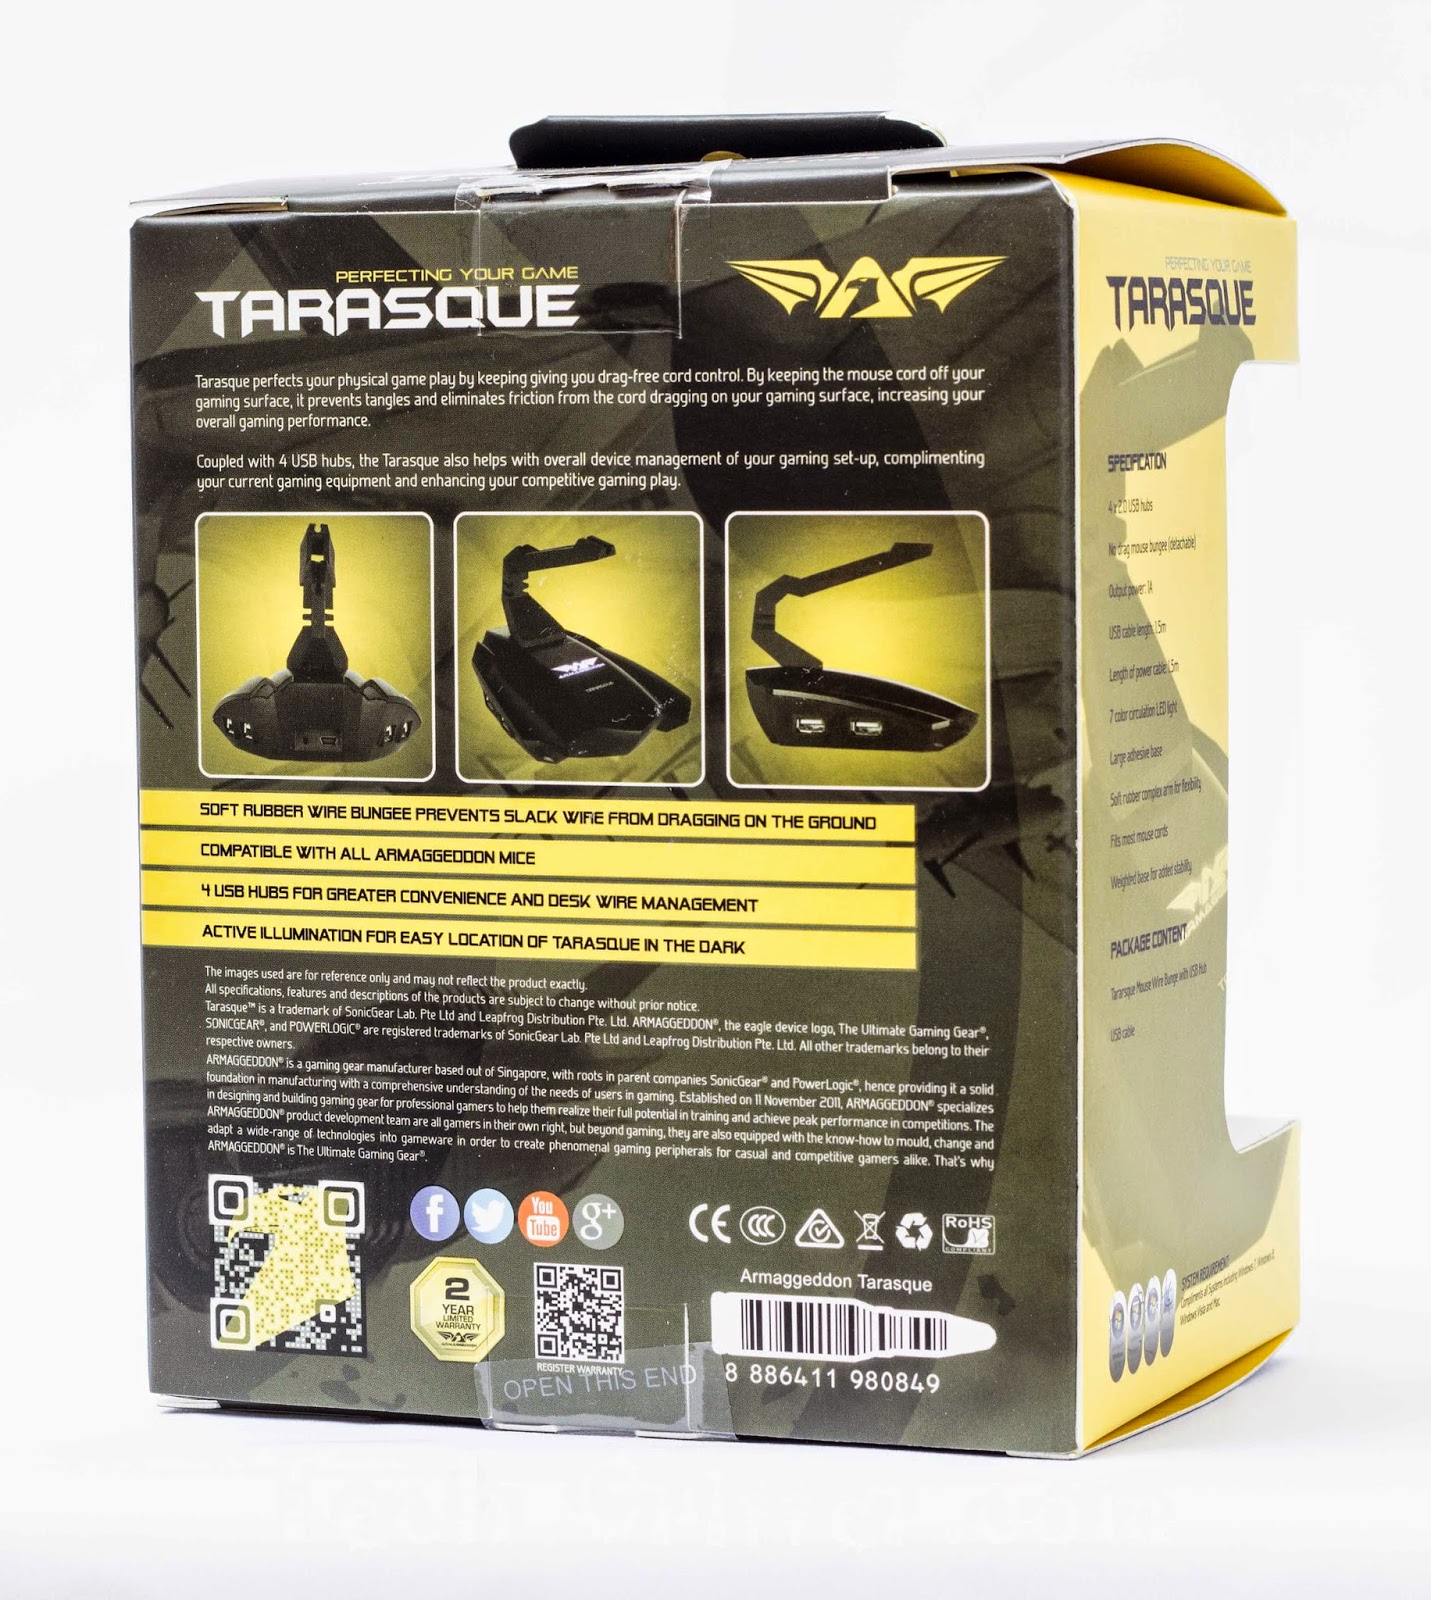 Unboxing & Review: Armaggeddon Tarasque Mouse Bungee 8